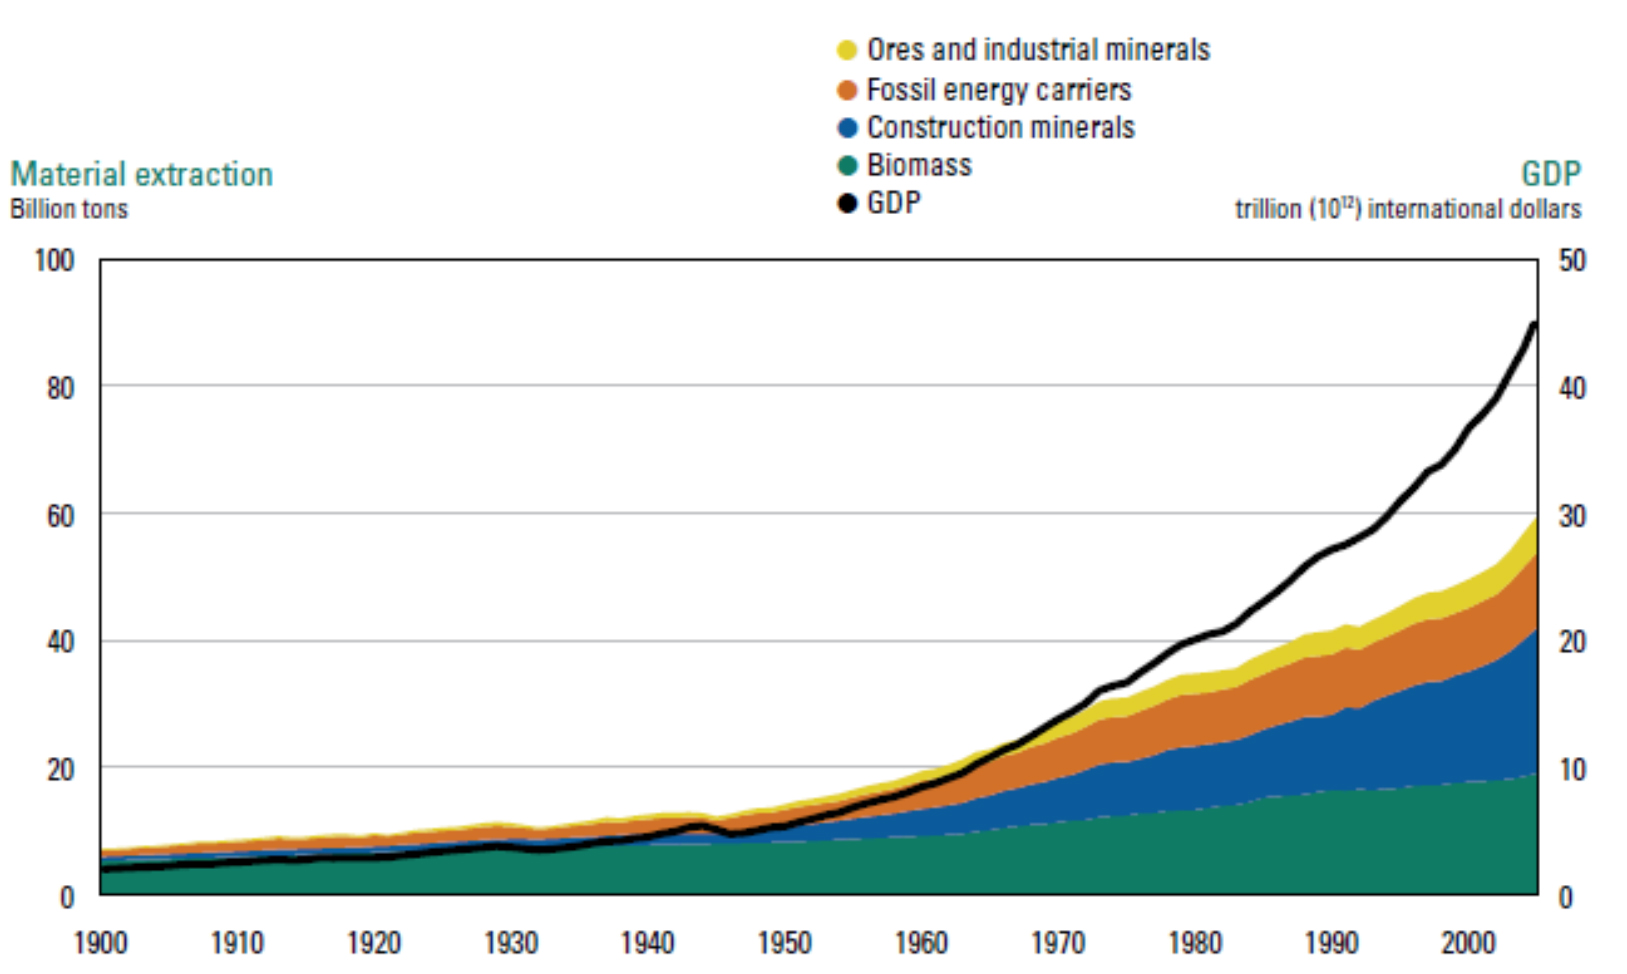 Global udvinding af materialer i mia. tons, 1900-2005. Kilde: Krausmann et al. 2009 “Global extraction of materials in billion tonnes – 1990 – 2005. Source: Krausmann et al. 2009. “Growth in global materials use, GDP and population during the 20th century”, Ecological Economics. Here taken from: United Nations Environment Programme (2011): Decoupling natural resource use and environmental impacts from economic growth.